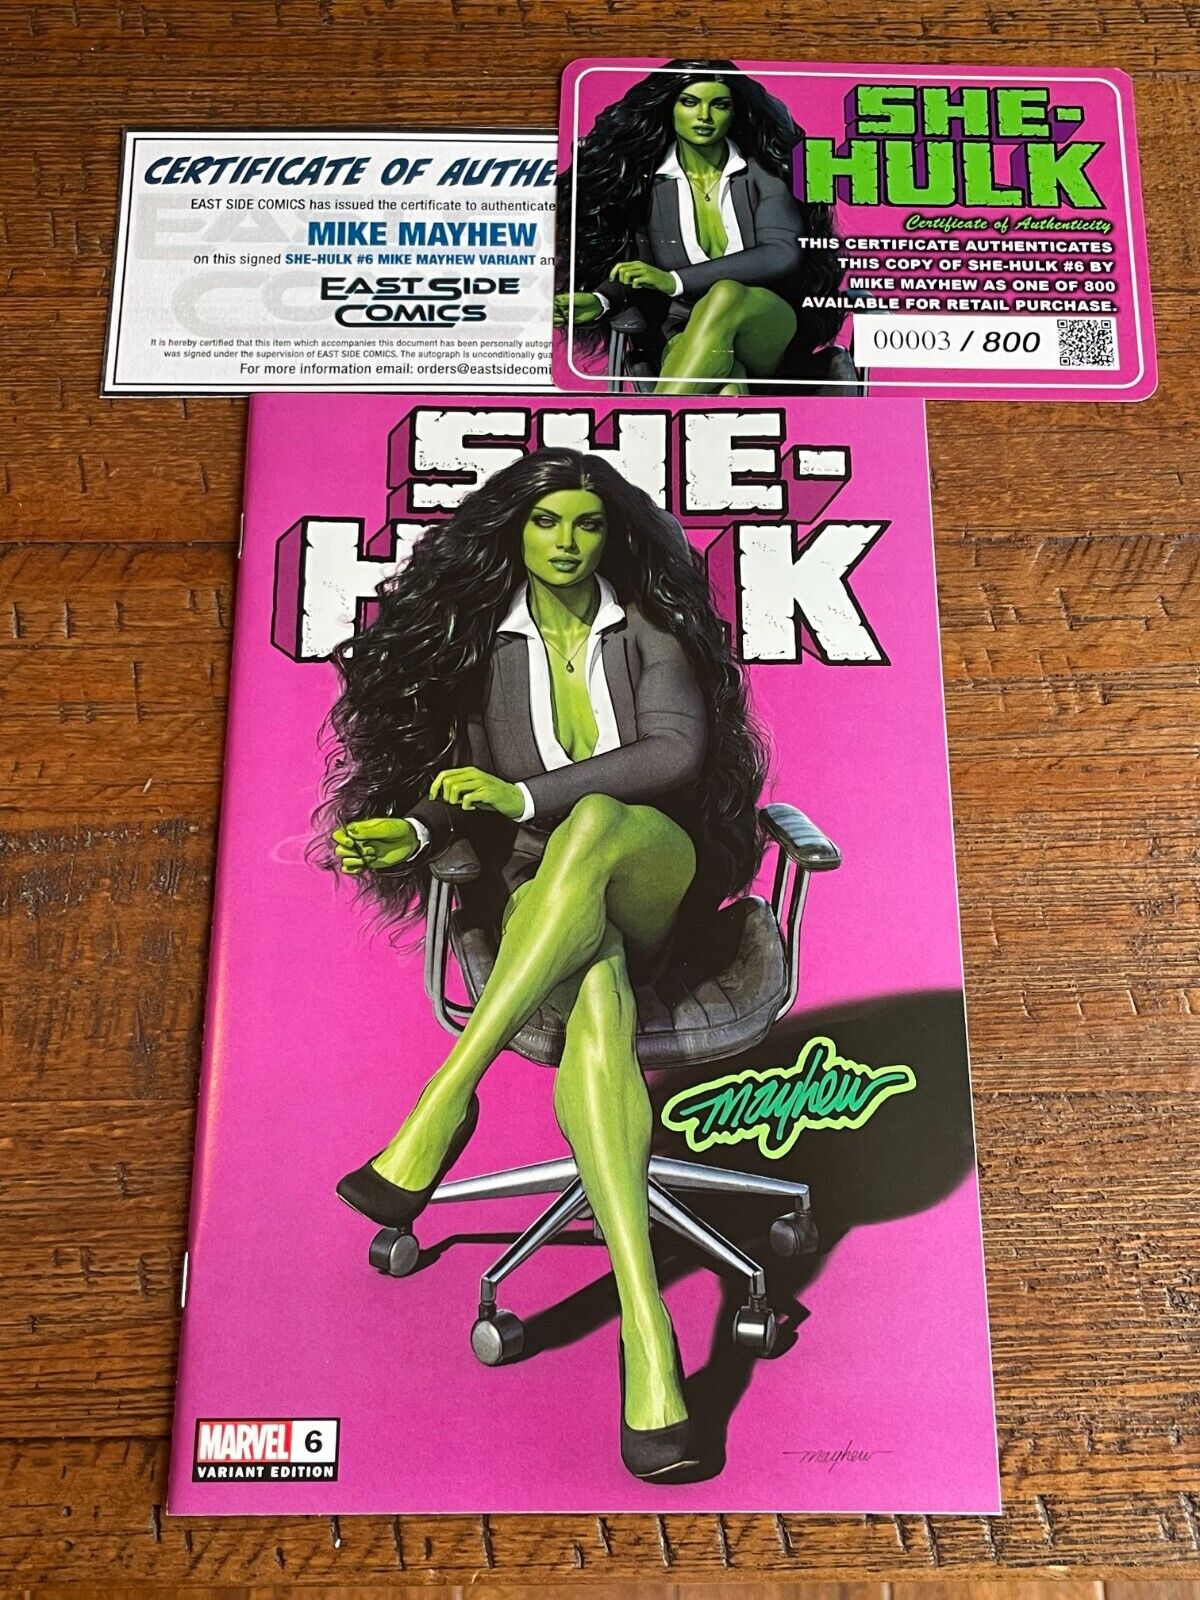 SHE-HULK 6 MIKE MAYHEW SIGNED EXCL VARIANT LIMITED TO 800 W/ COA DISNEY PLUS